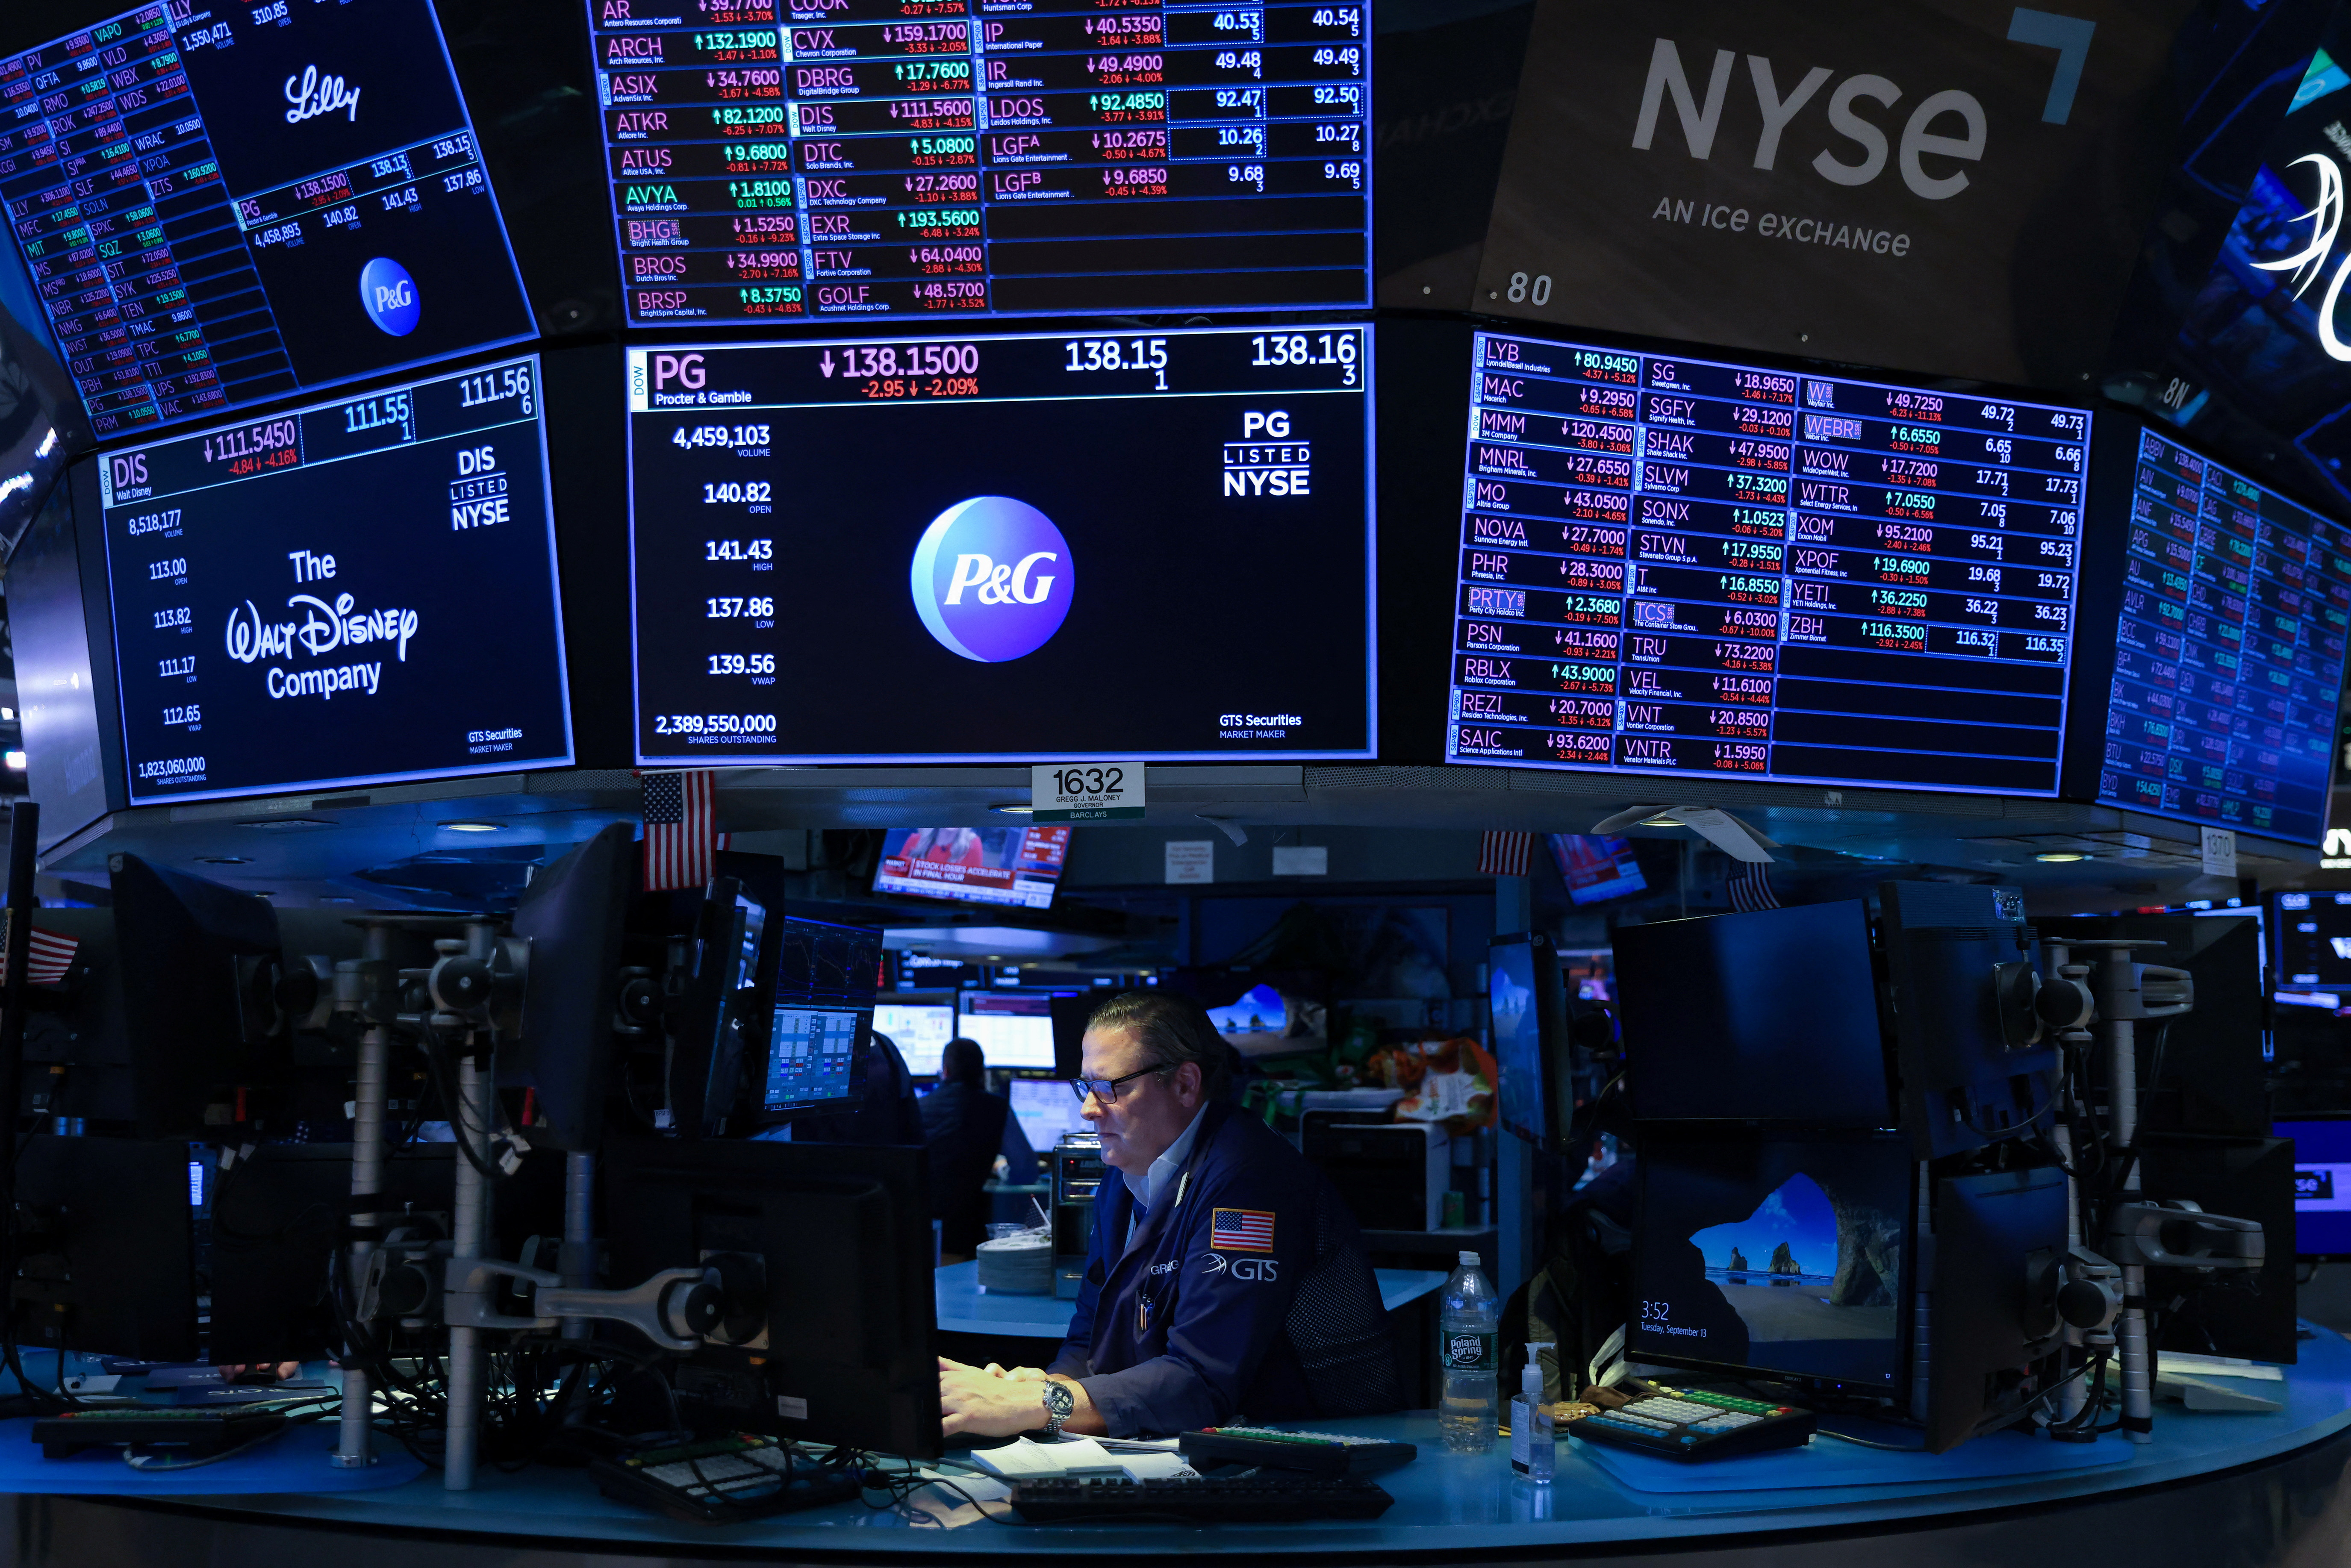 A trader works on the trading floor of the New York Stock Exchange (NYSE) in Manhattan, New York City